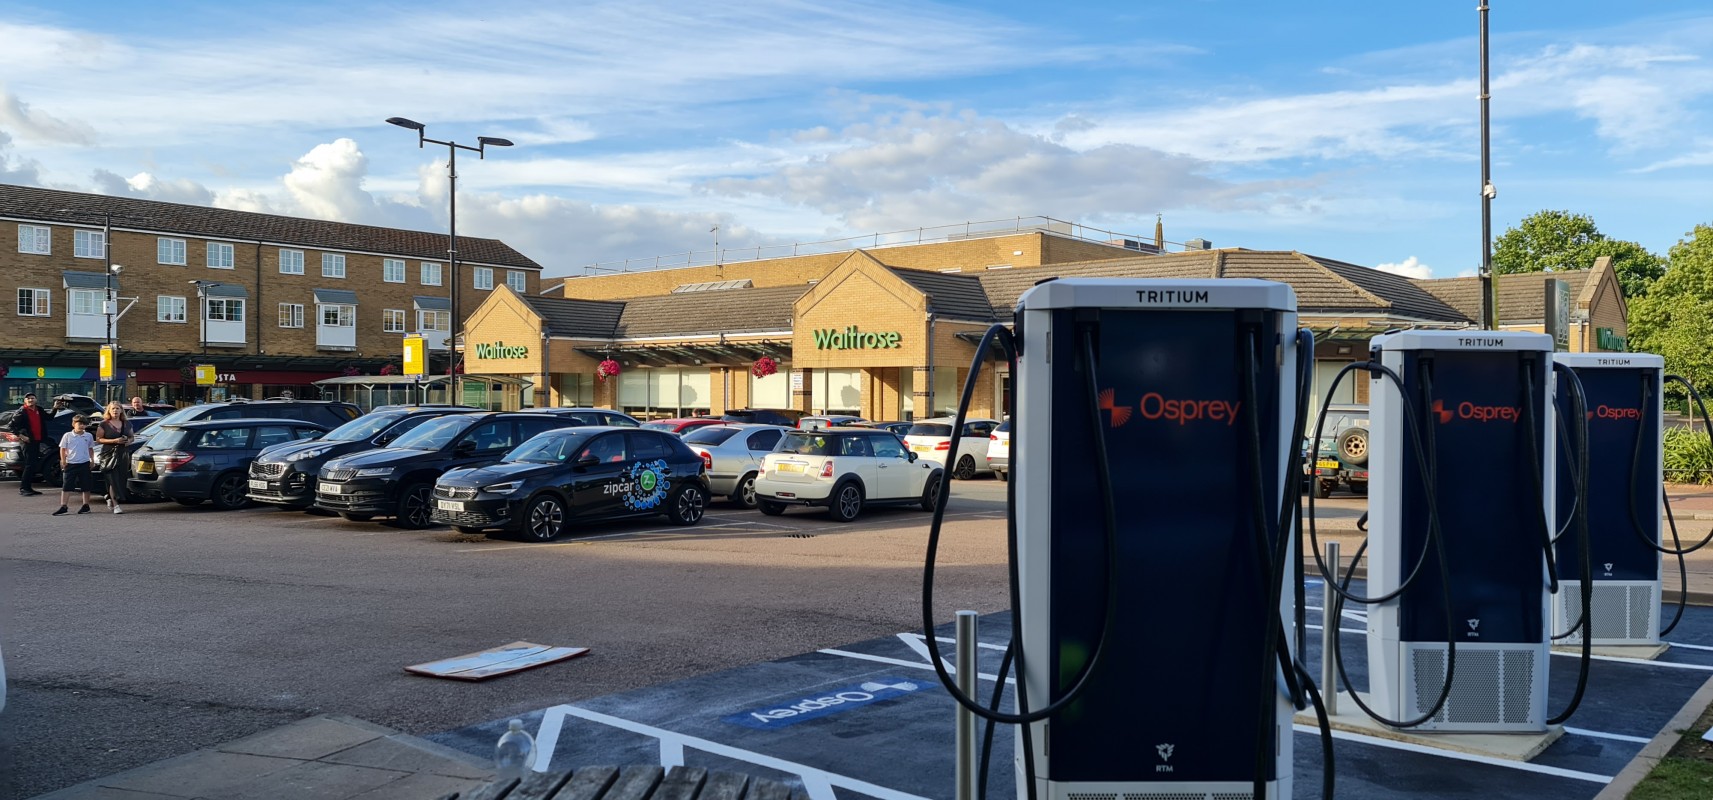 New Image for THREE EV CHARGING POINTS INSTALLED AT BOWEN SQUARE, DAVENTRY